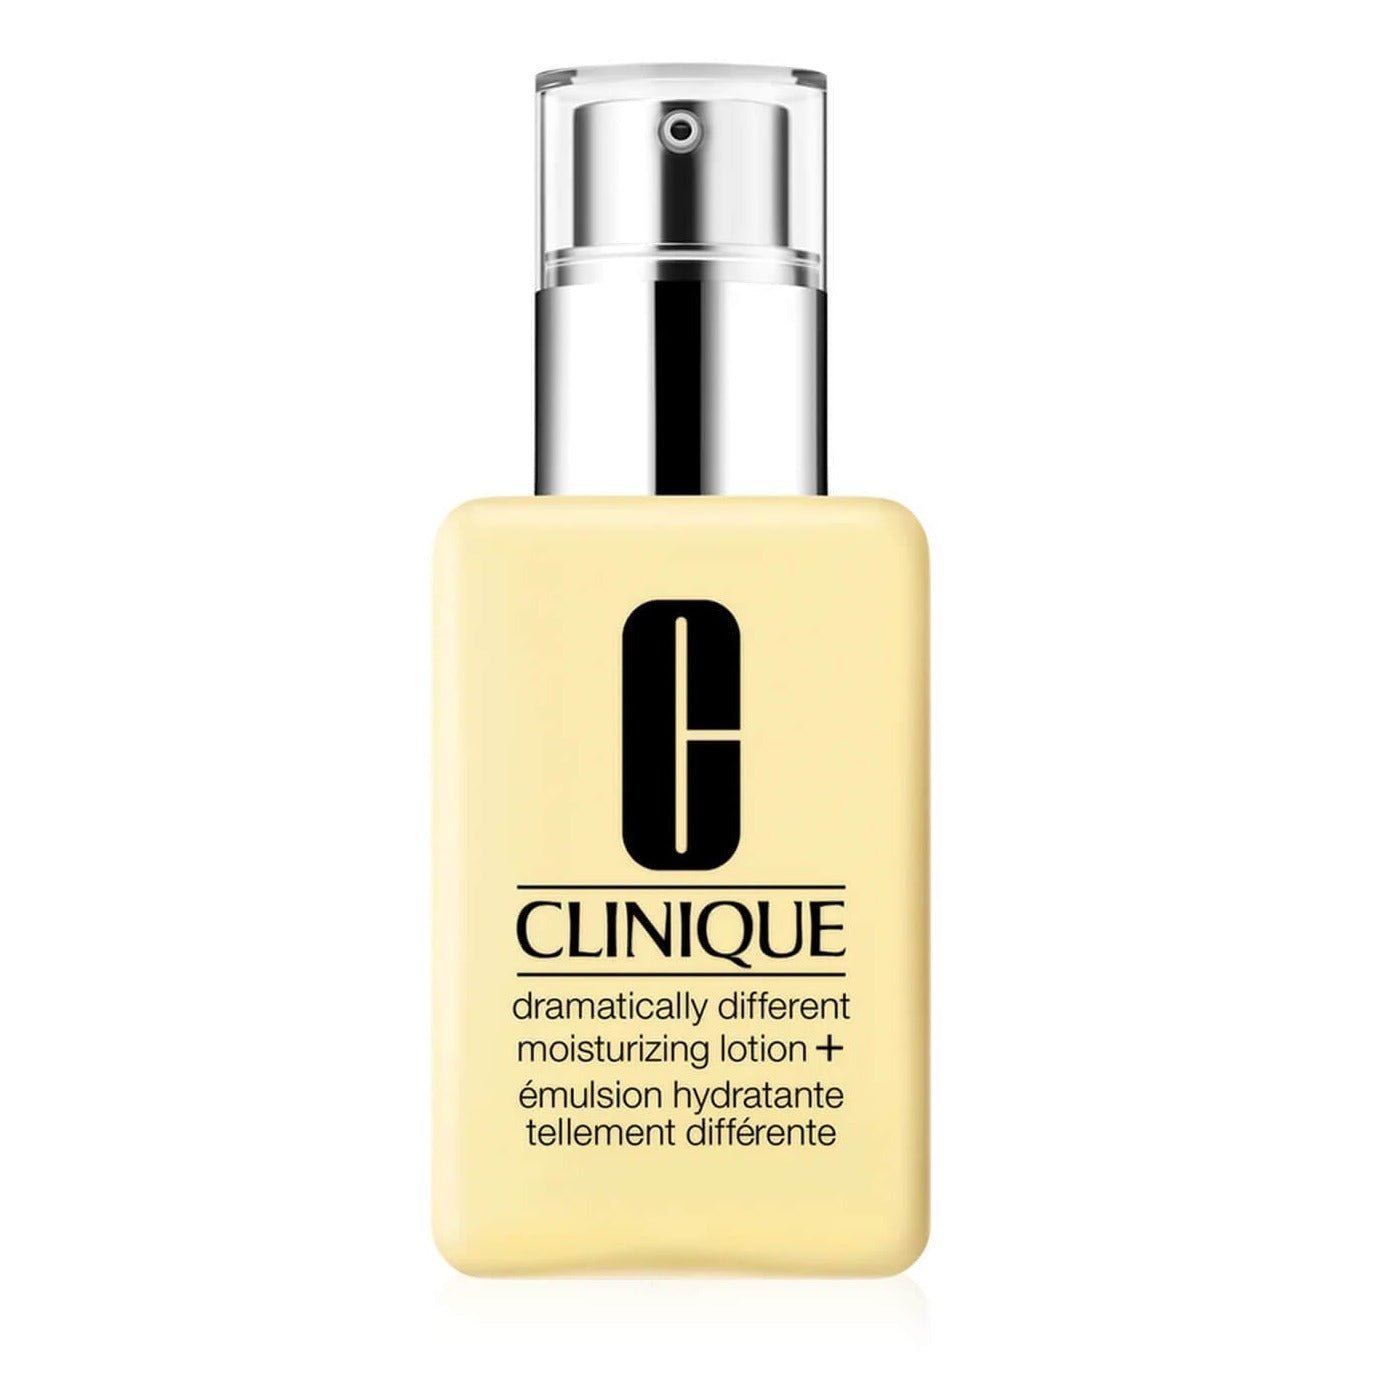 buy clinique moisturizing lotion available at heygirl.pk for delivery in Pakistan